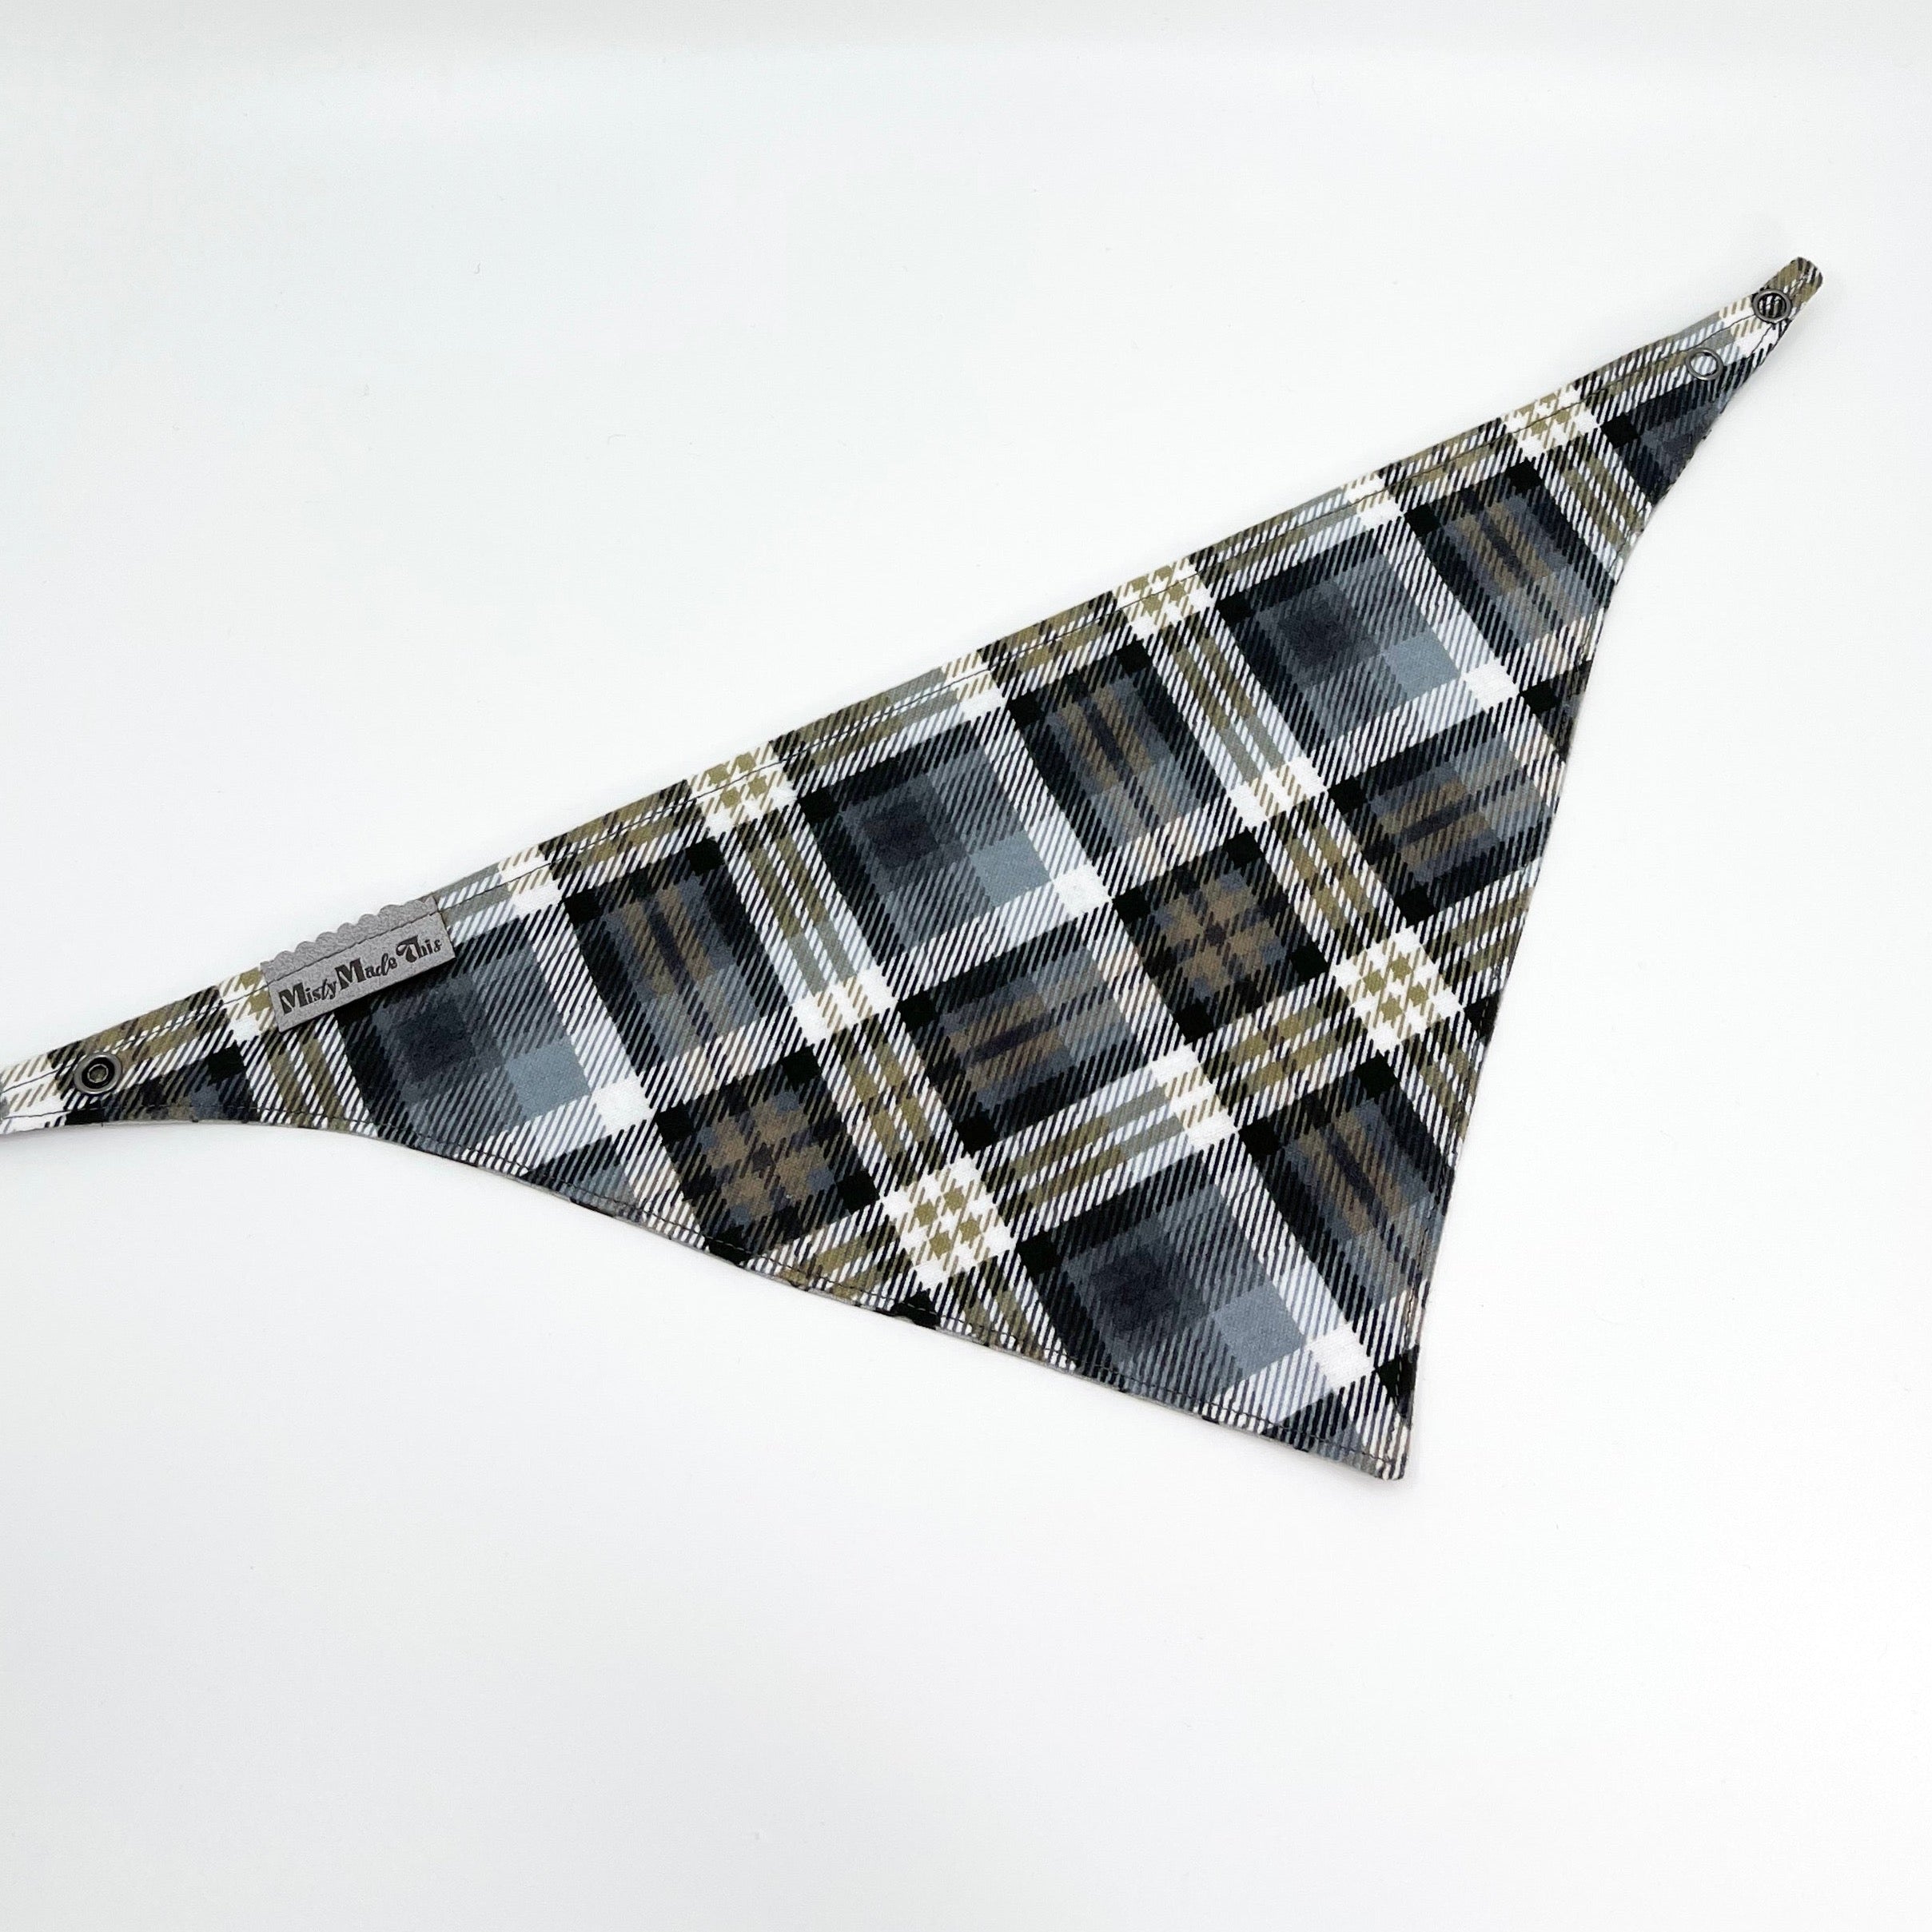 Campers with Plaid Flannel Pet Bandana